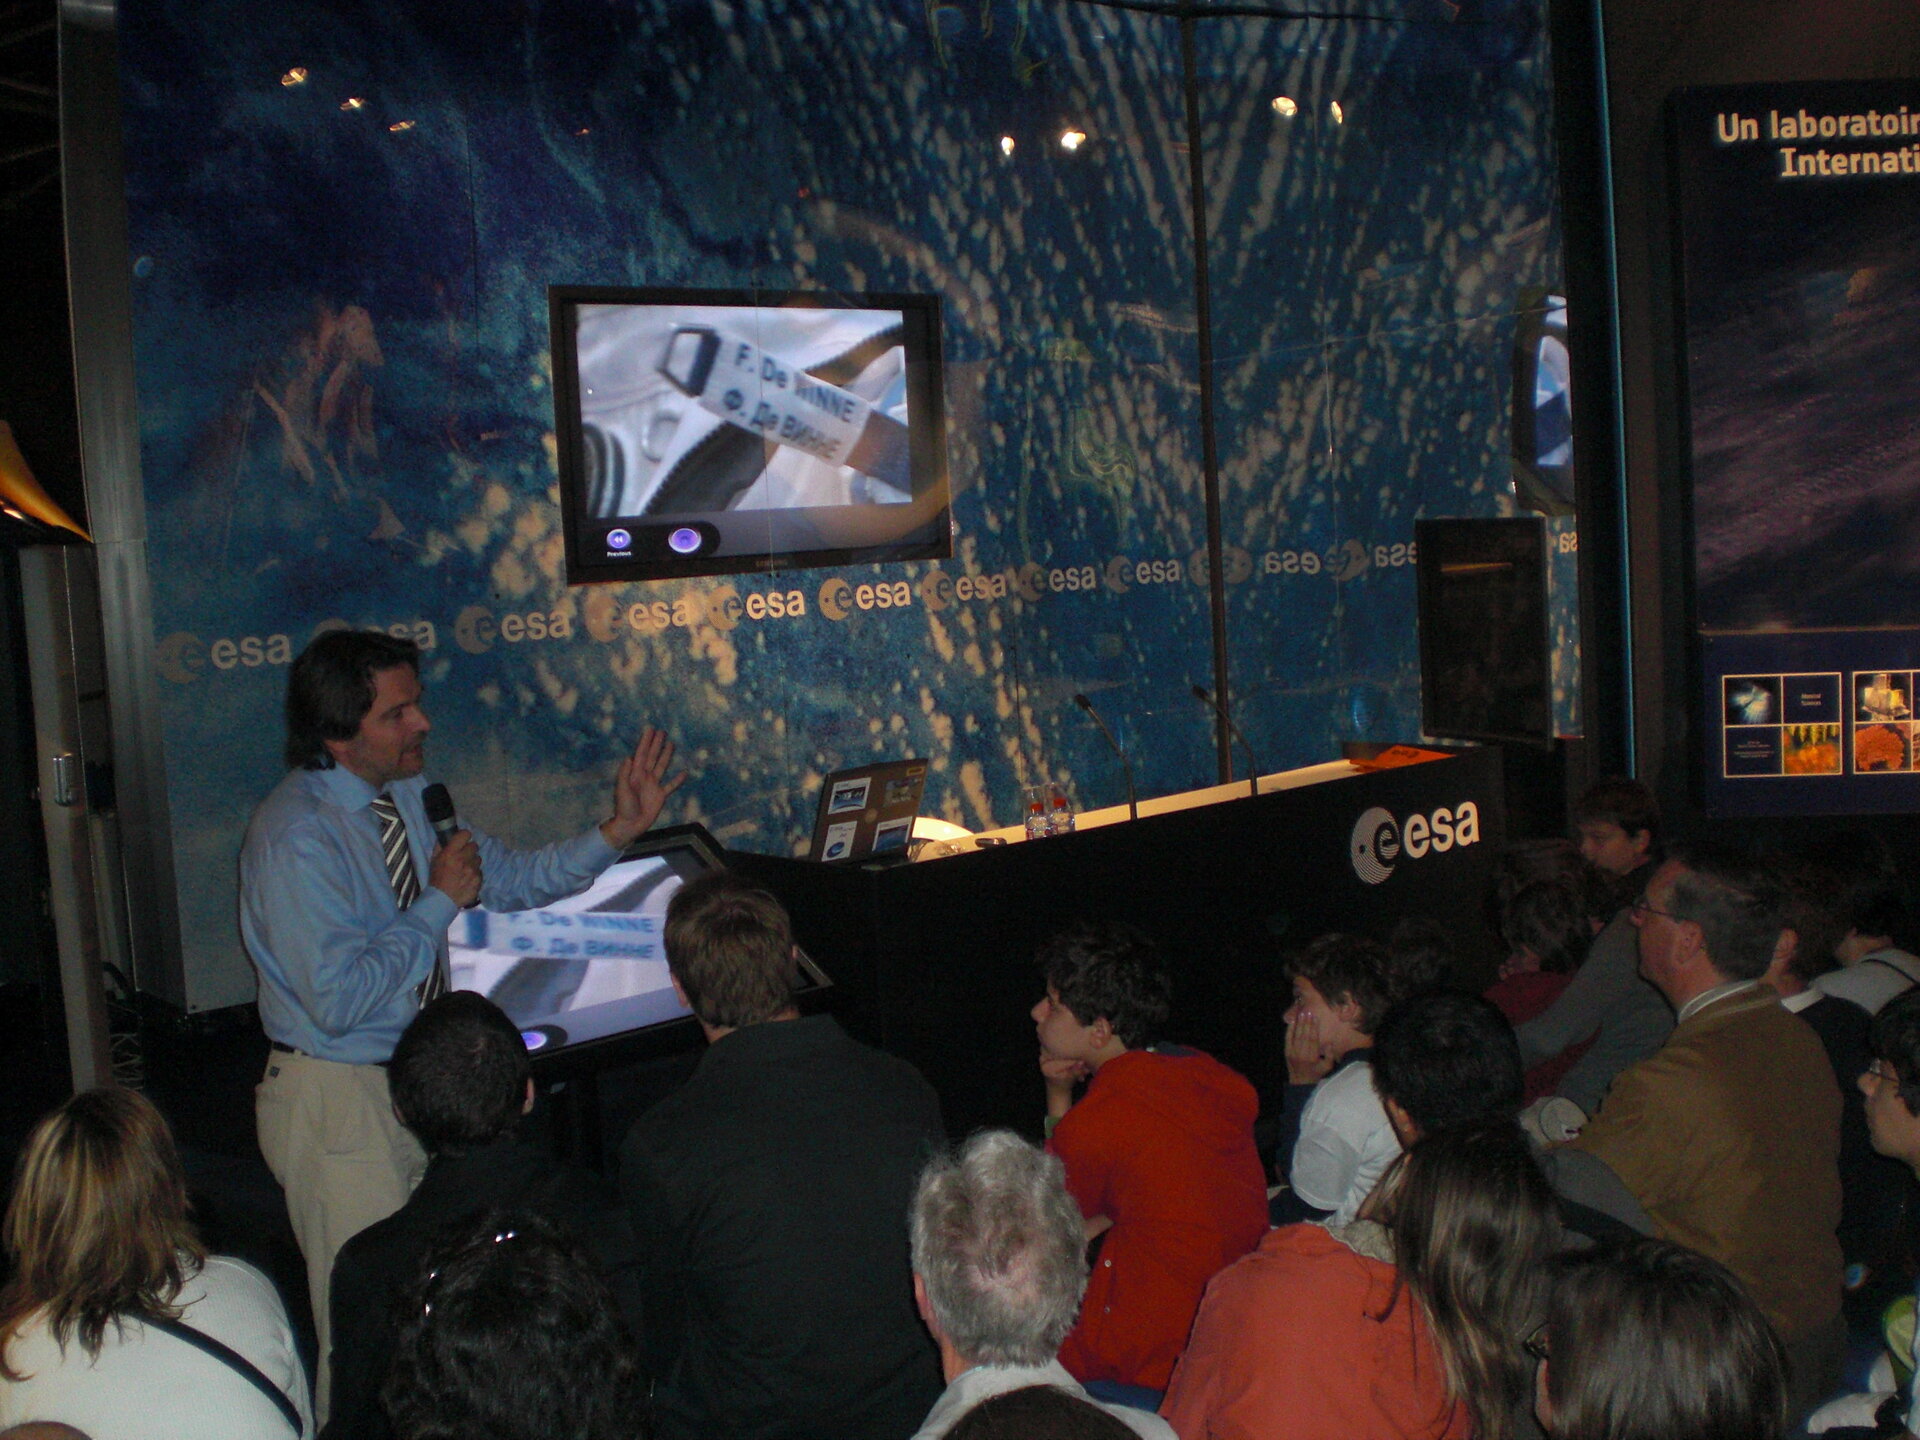 Massimo Sabbatini presents 'Europe and the ISS, the ATV and its evolution' to the public